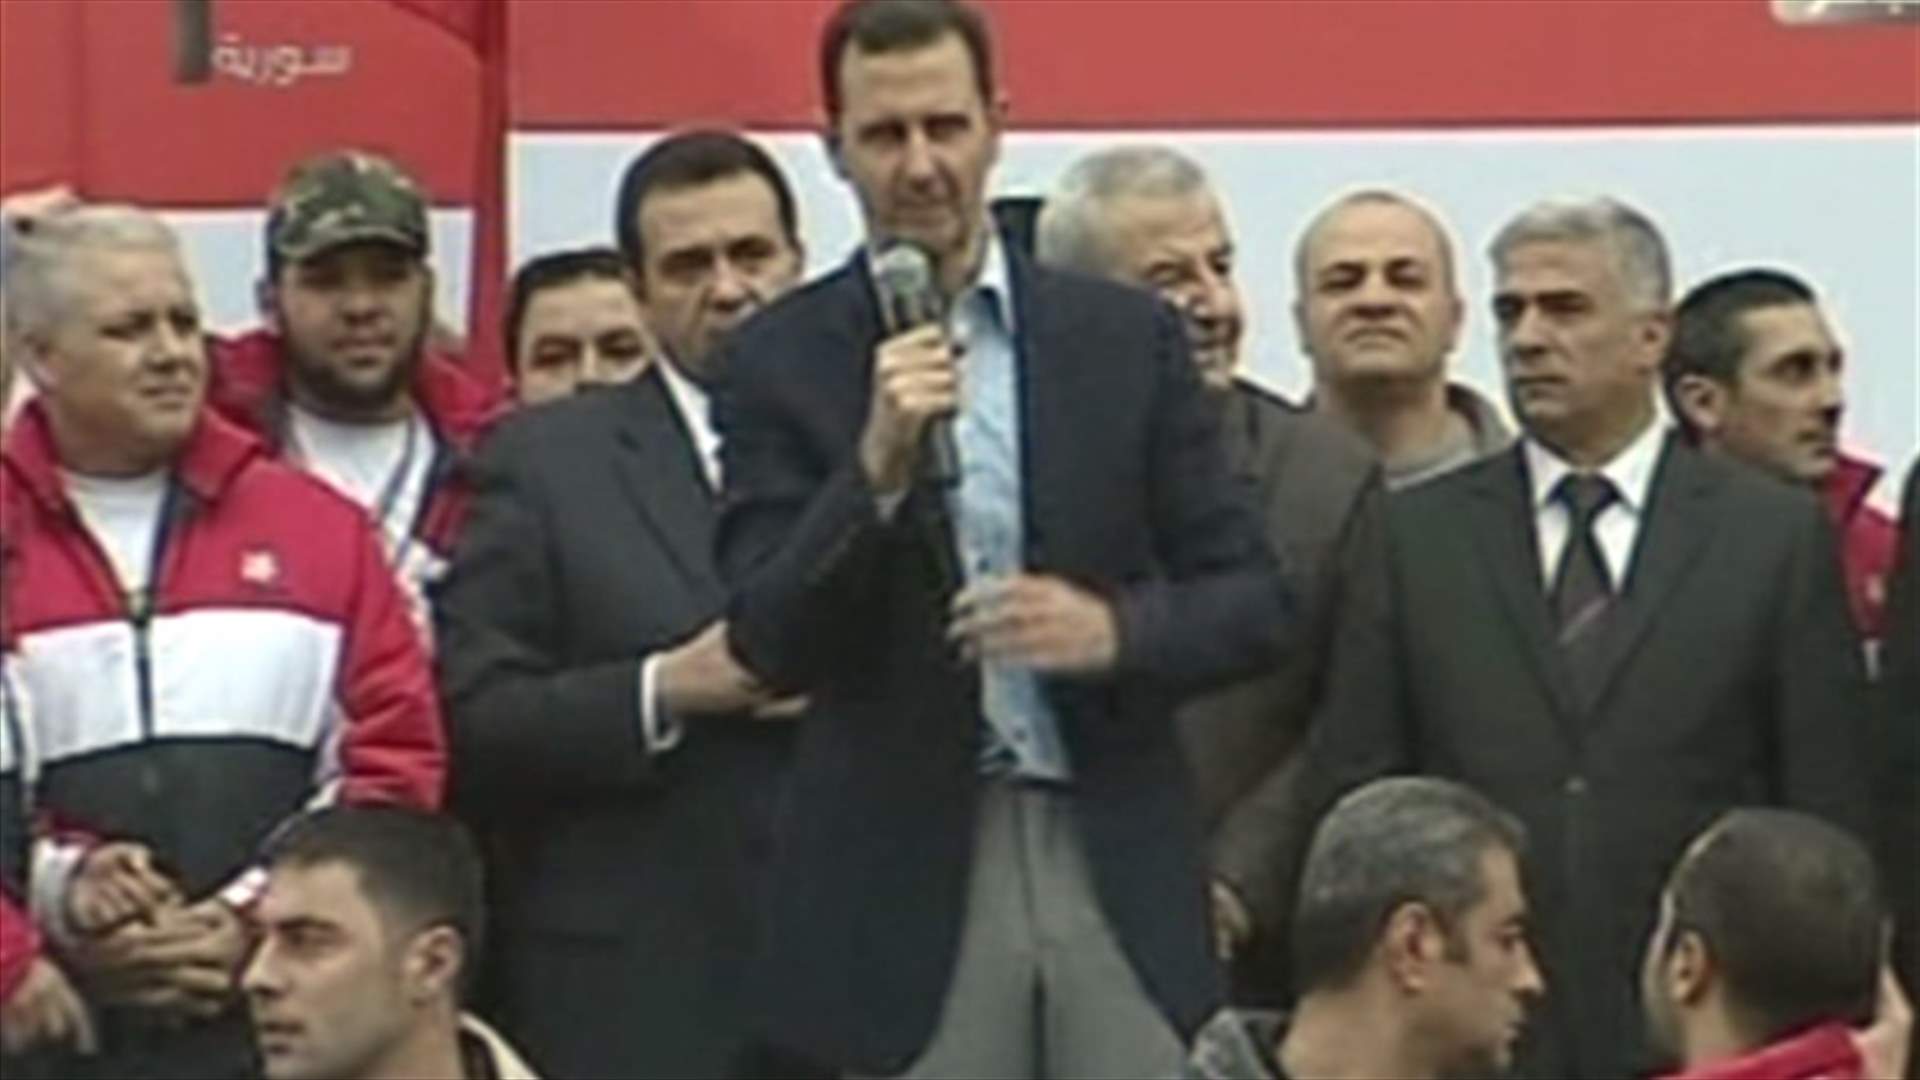 Assad to cheering crowd: We will beat the conspiracy 